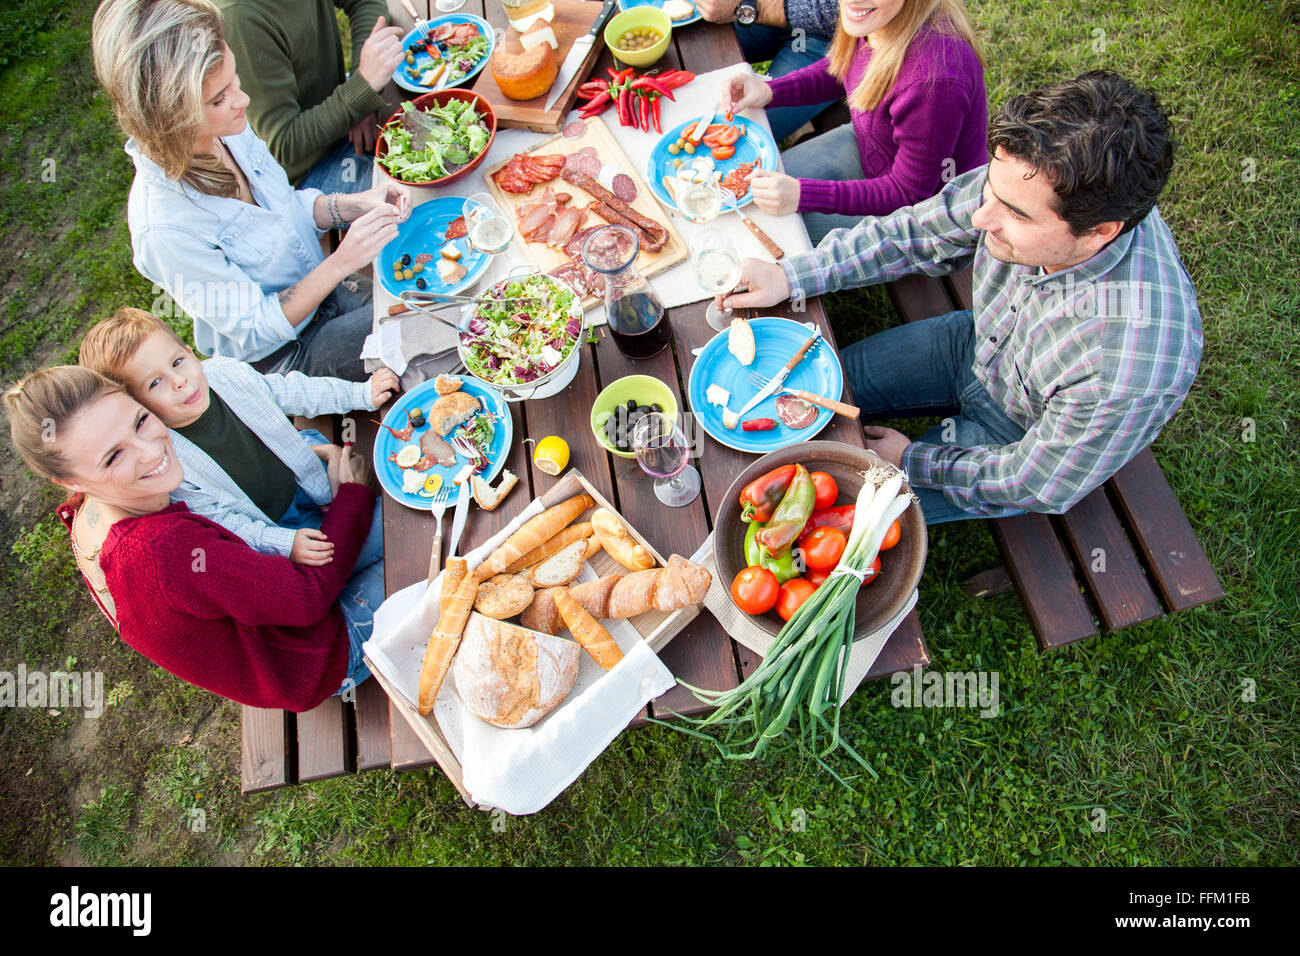 Group of friends celebrating together on garden party Stock Photo